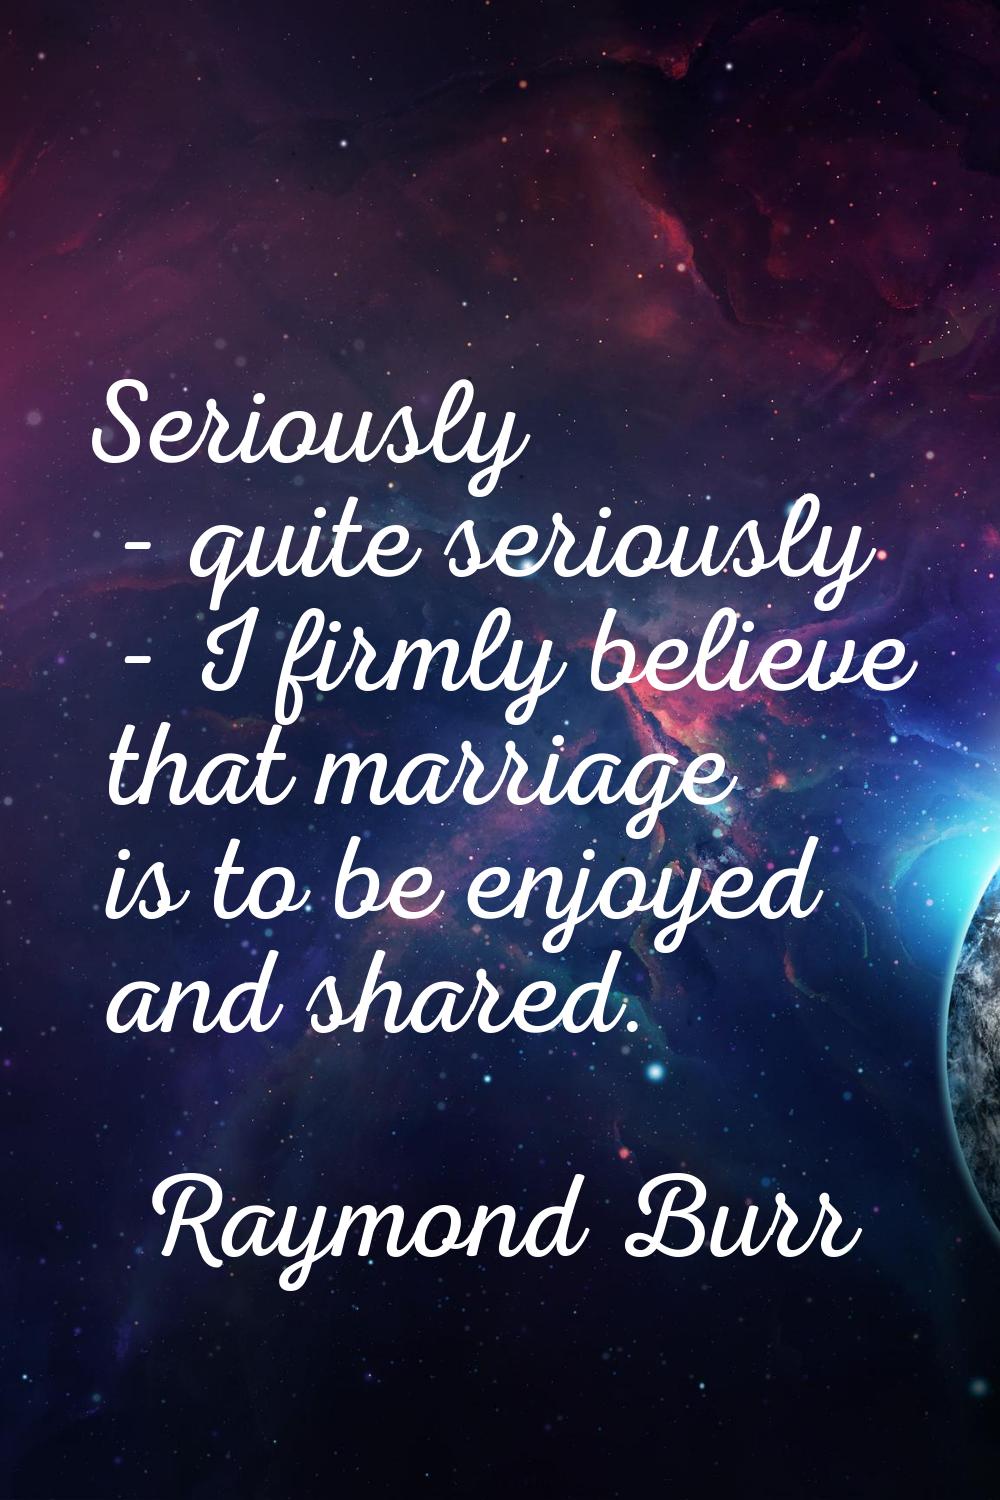 Seriously - quite seriously - I firmly believe that marriage is to be enjoyed and shared.